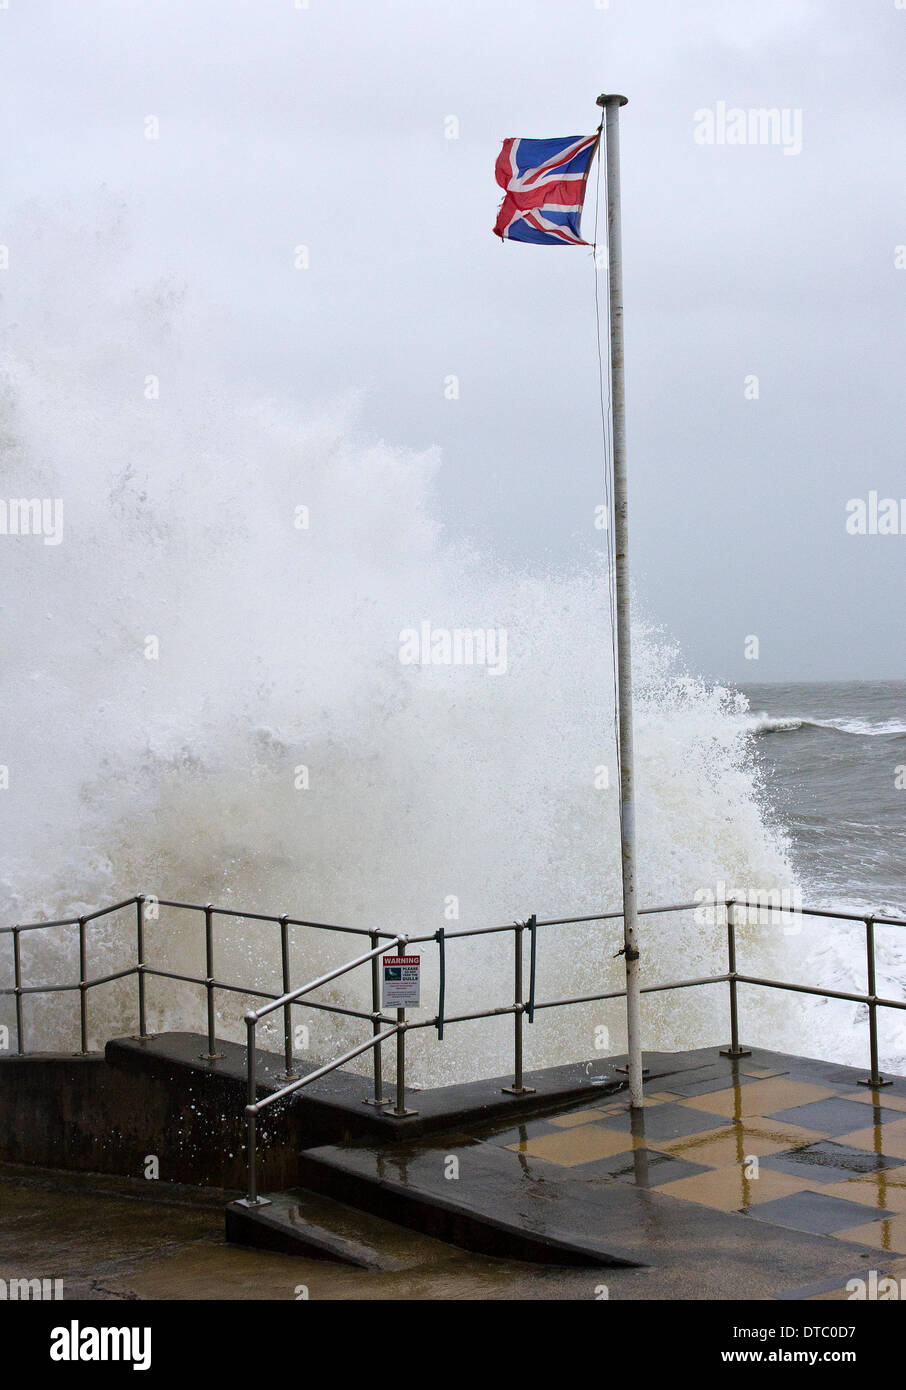 Storm at Teignmouth,Devon,14-2-14 at 4pm,Britain battered by storms,Nature, Vertical, Outdoors, Low Angle View, UK, England, Pattern, Wind, Sky, Storm, Cloud, Day, Devon, High Up, Curve, Backgrounds, Scenics, Directly Below, Weather, Colour Image, Heaven, No People, Photography, Swirl, Teignmouth, Meteorology. Stock Photo